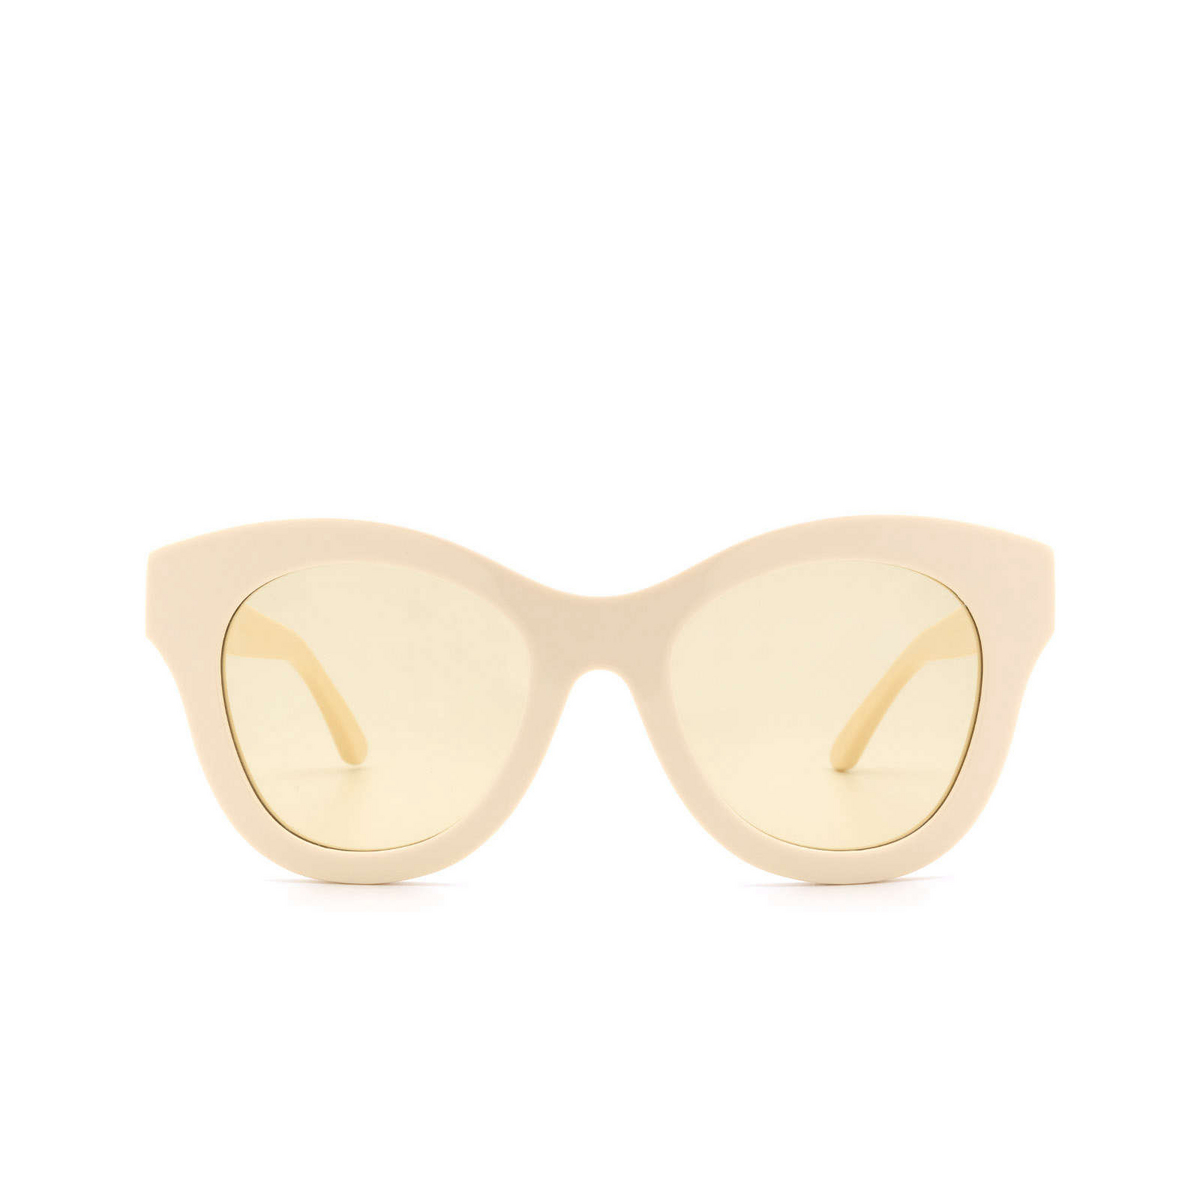 Huma® Butterfly Sunglasses: Cami color Ivory 07 - front view.